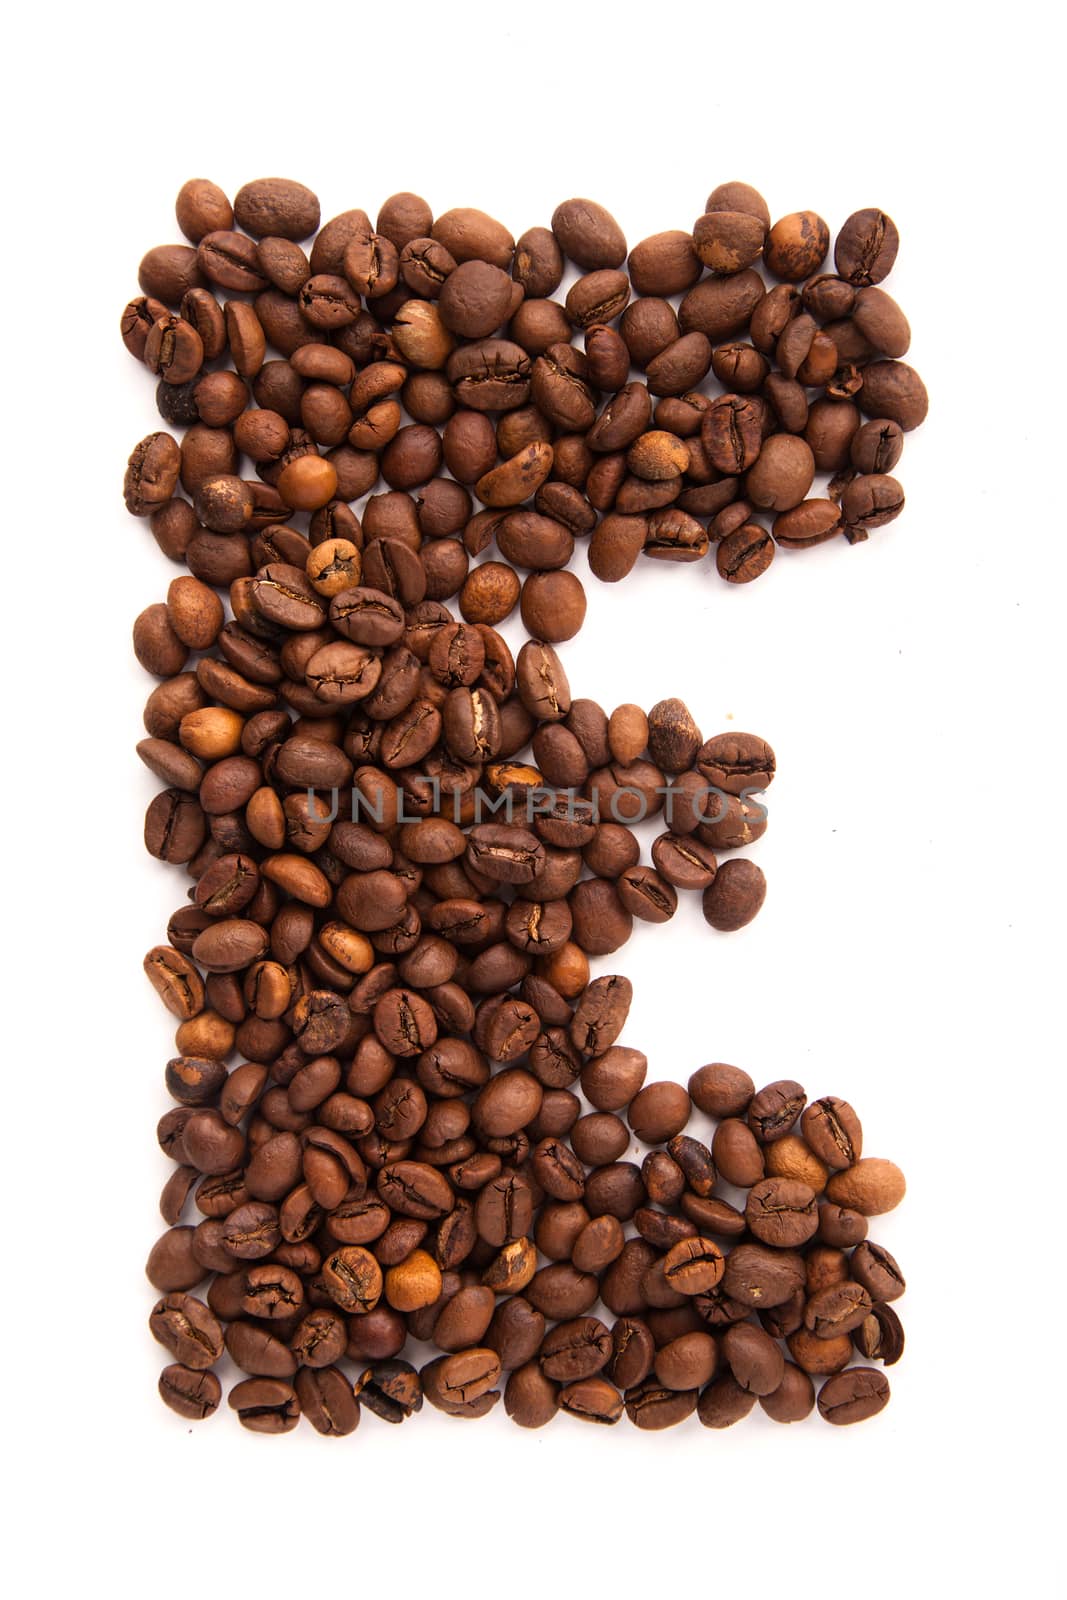 Alphabet letter E of roasted coffee beans isolated on white background by traza